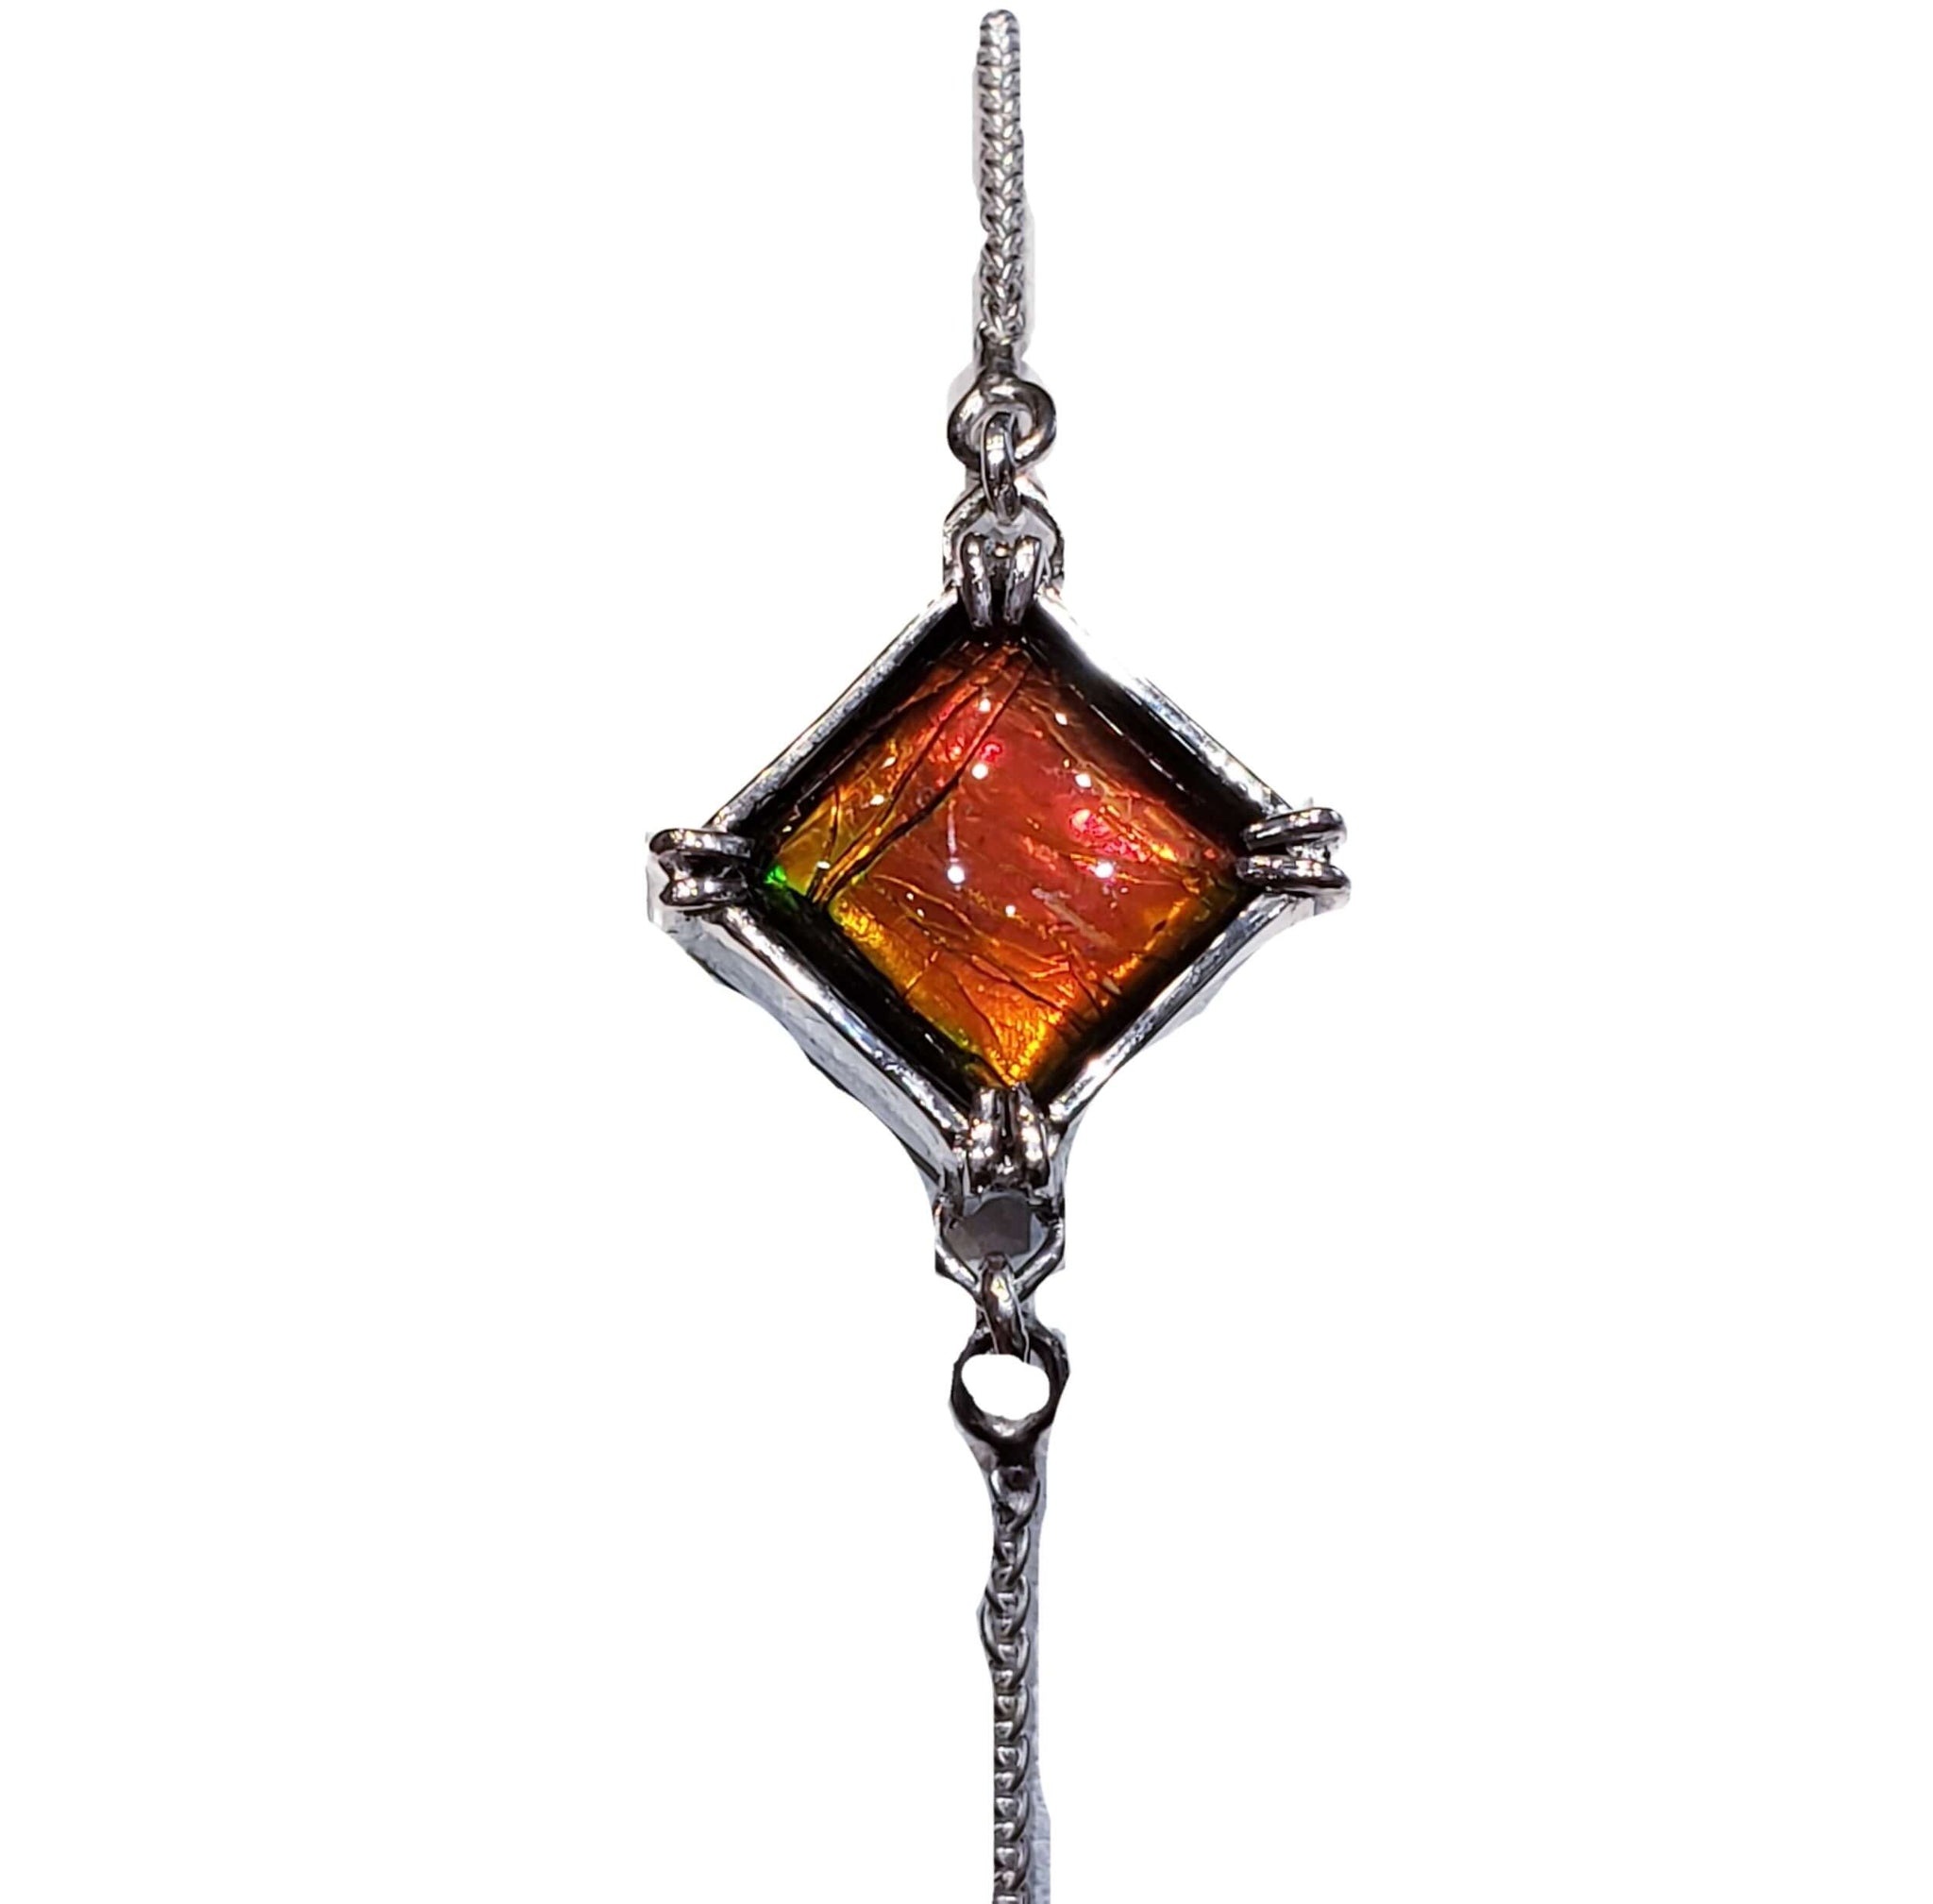 Ammolite Bracelet with Square Gemstone with Red and Orange PN: E21073 %product from Empire Ammolite